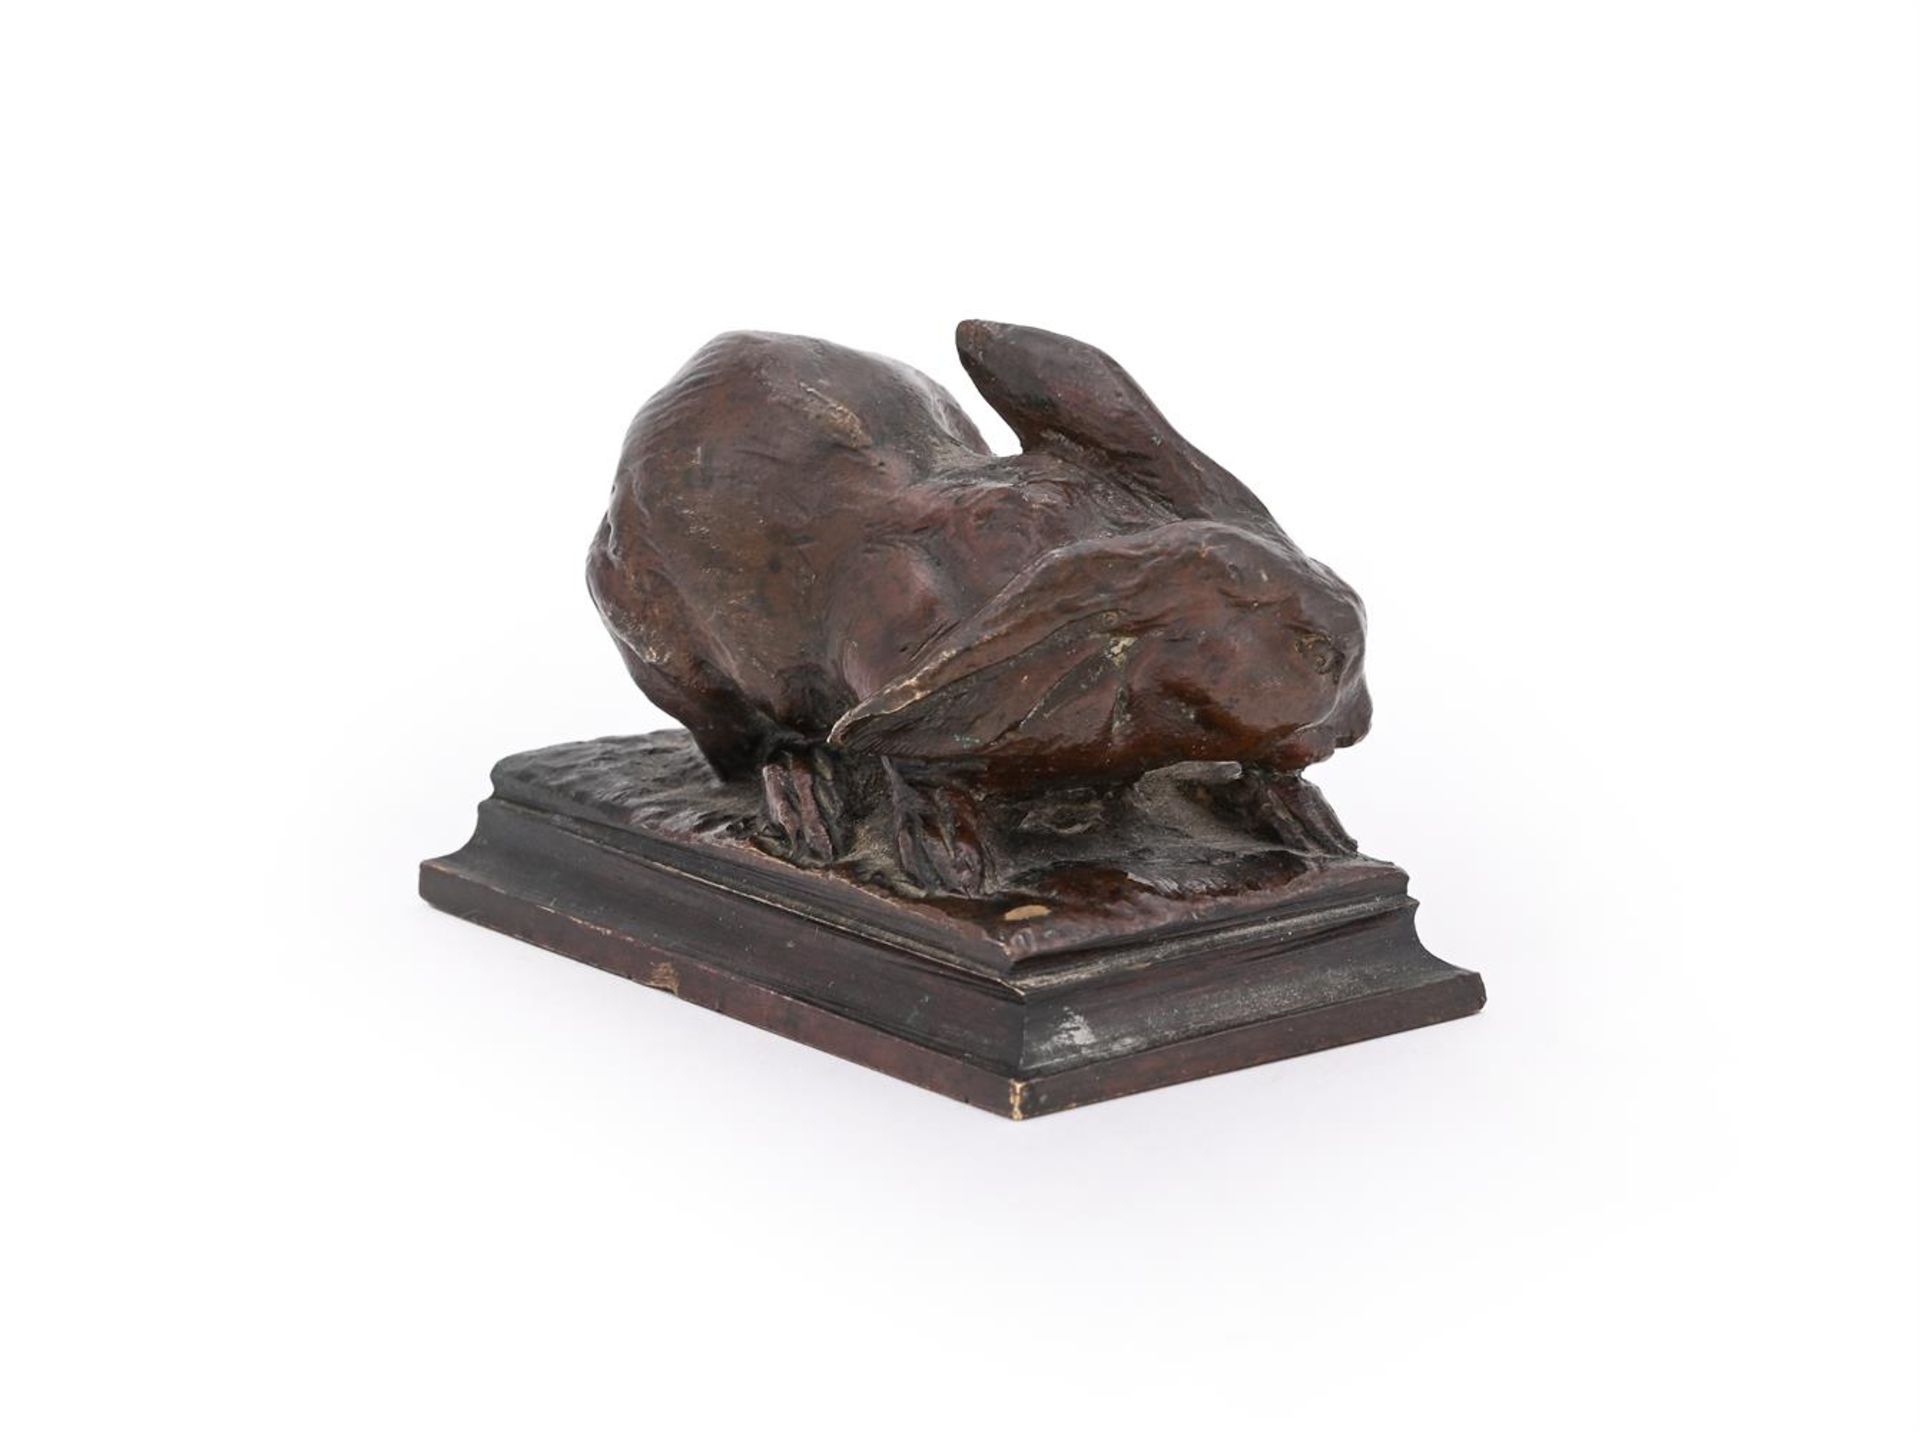 CHARLES GREMION (FRENCH, 19TH/20TH CENTURY), A BRONZE MODEL OF A HARE GROOMING - Image 3 of 5